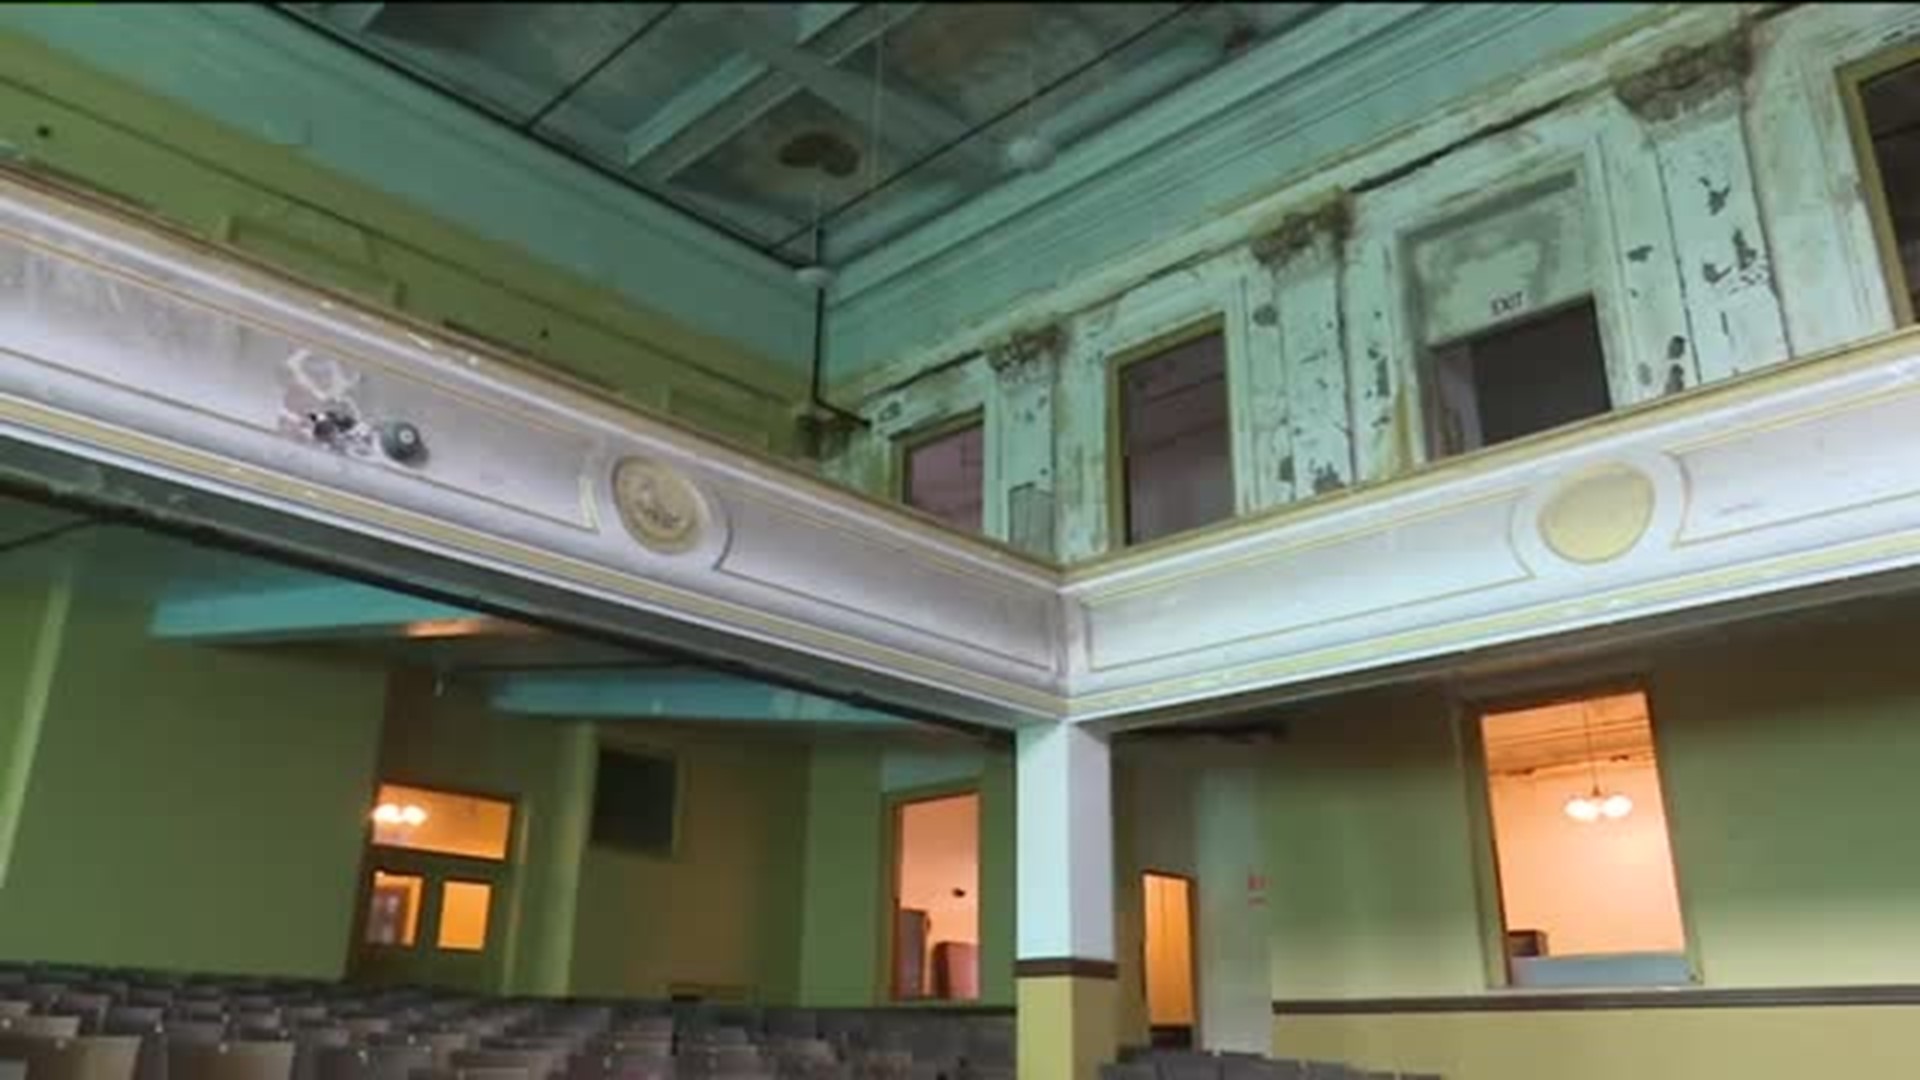 Group Works To Renovate Community Center in Shenandoah